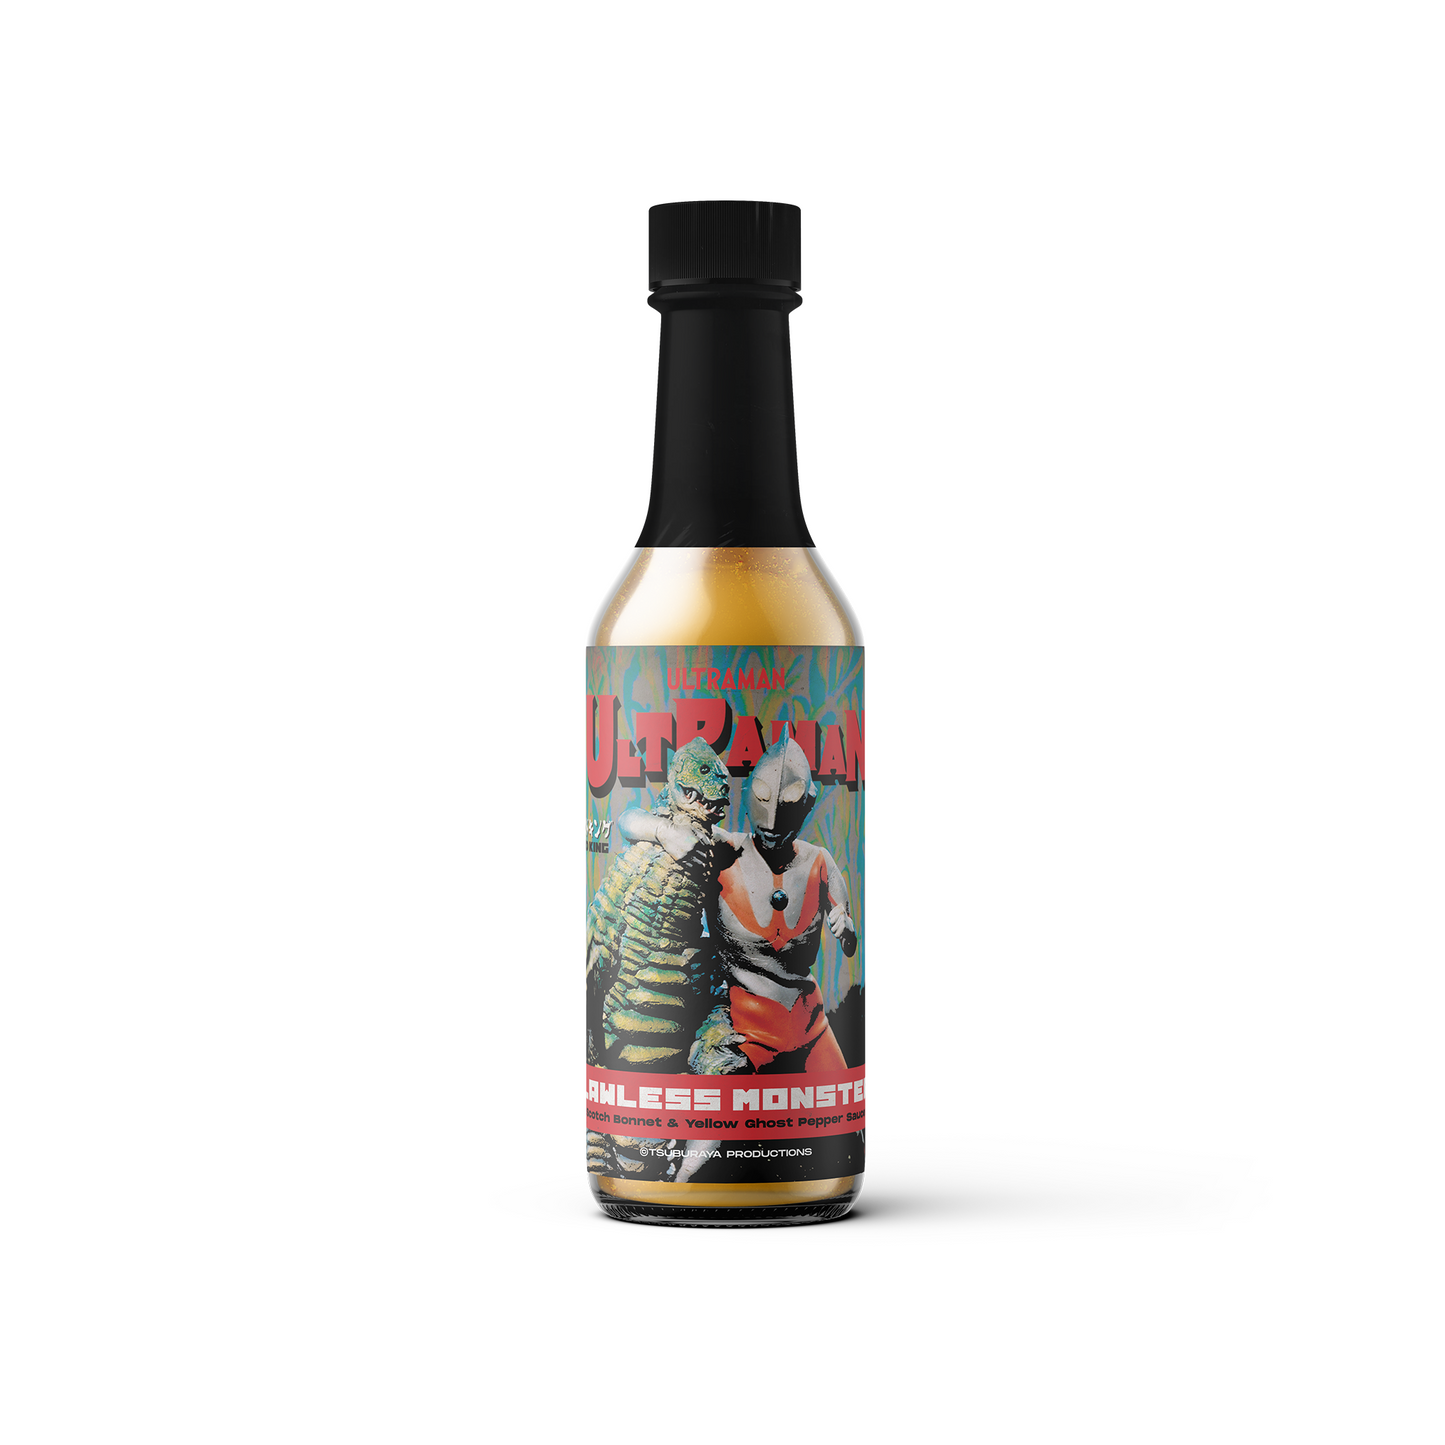 Red King's Lawless Monster : Scotch Bonnet & Yellow Ghost Pepper Sauce